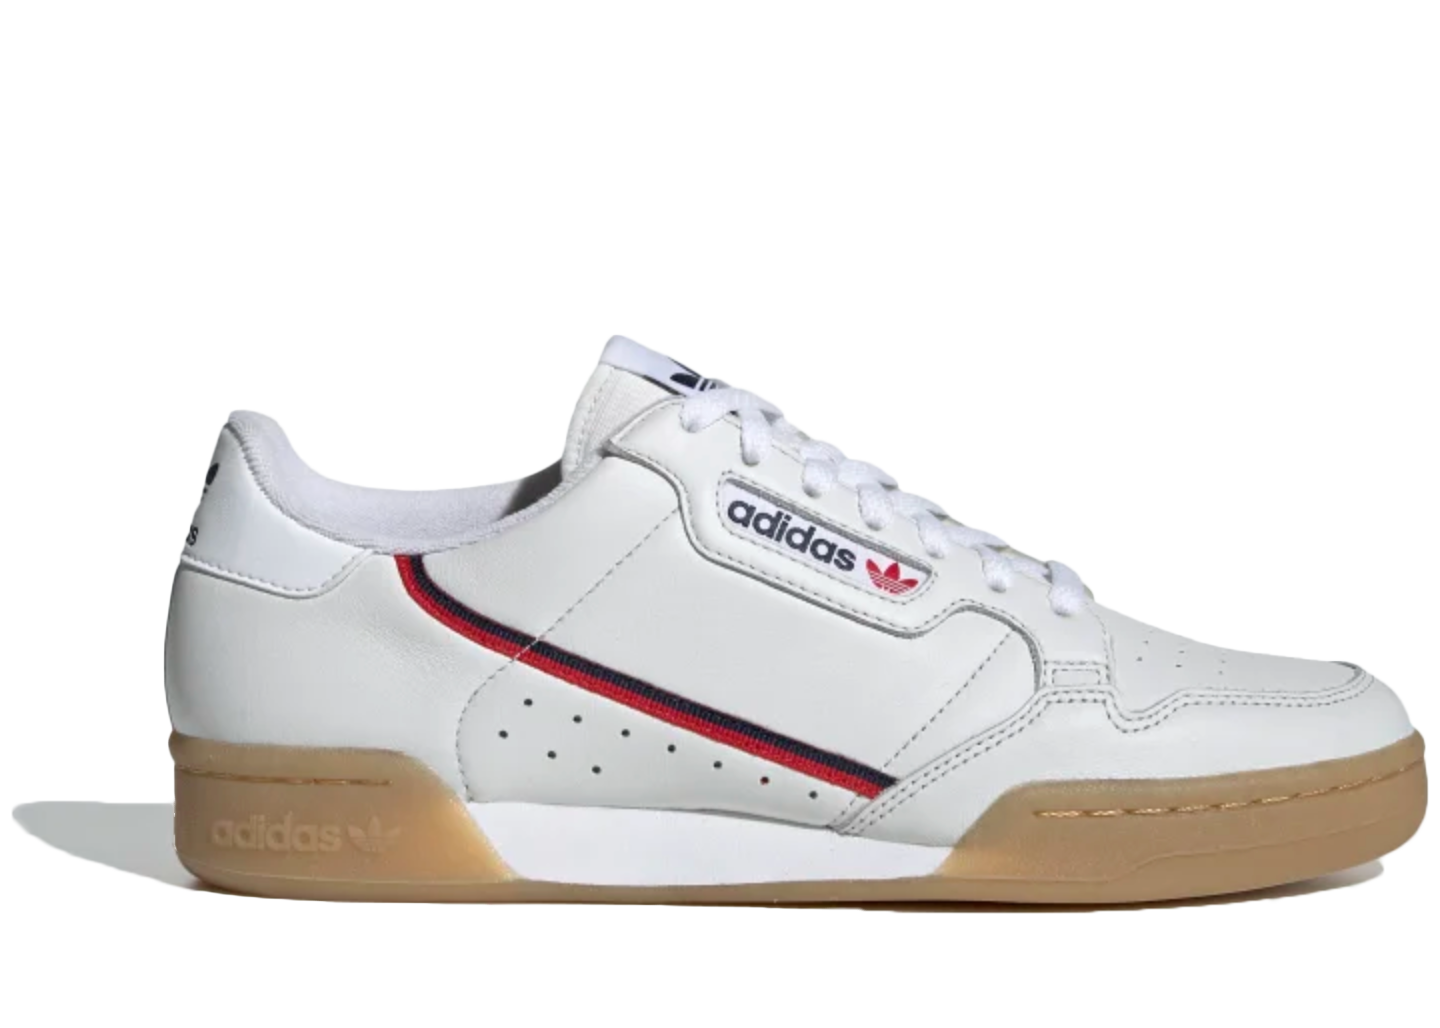 Men's sneakers and shoes adidas Originals Continental 80 Stripes Footwear  White/ Grey Two/ Off White | Queens